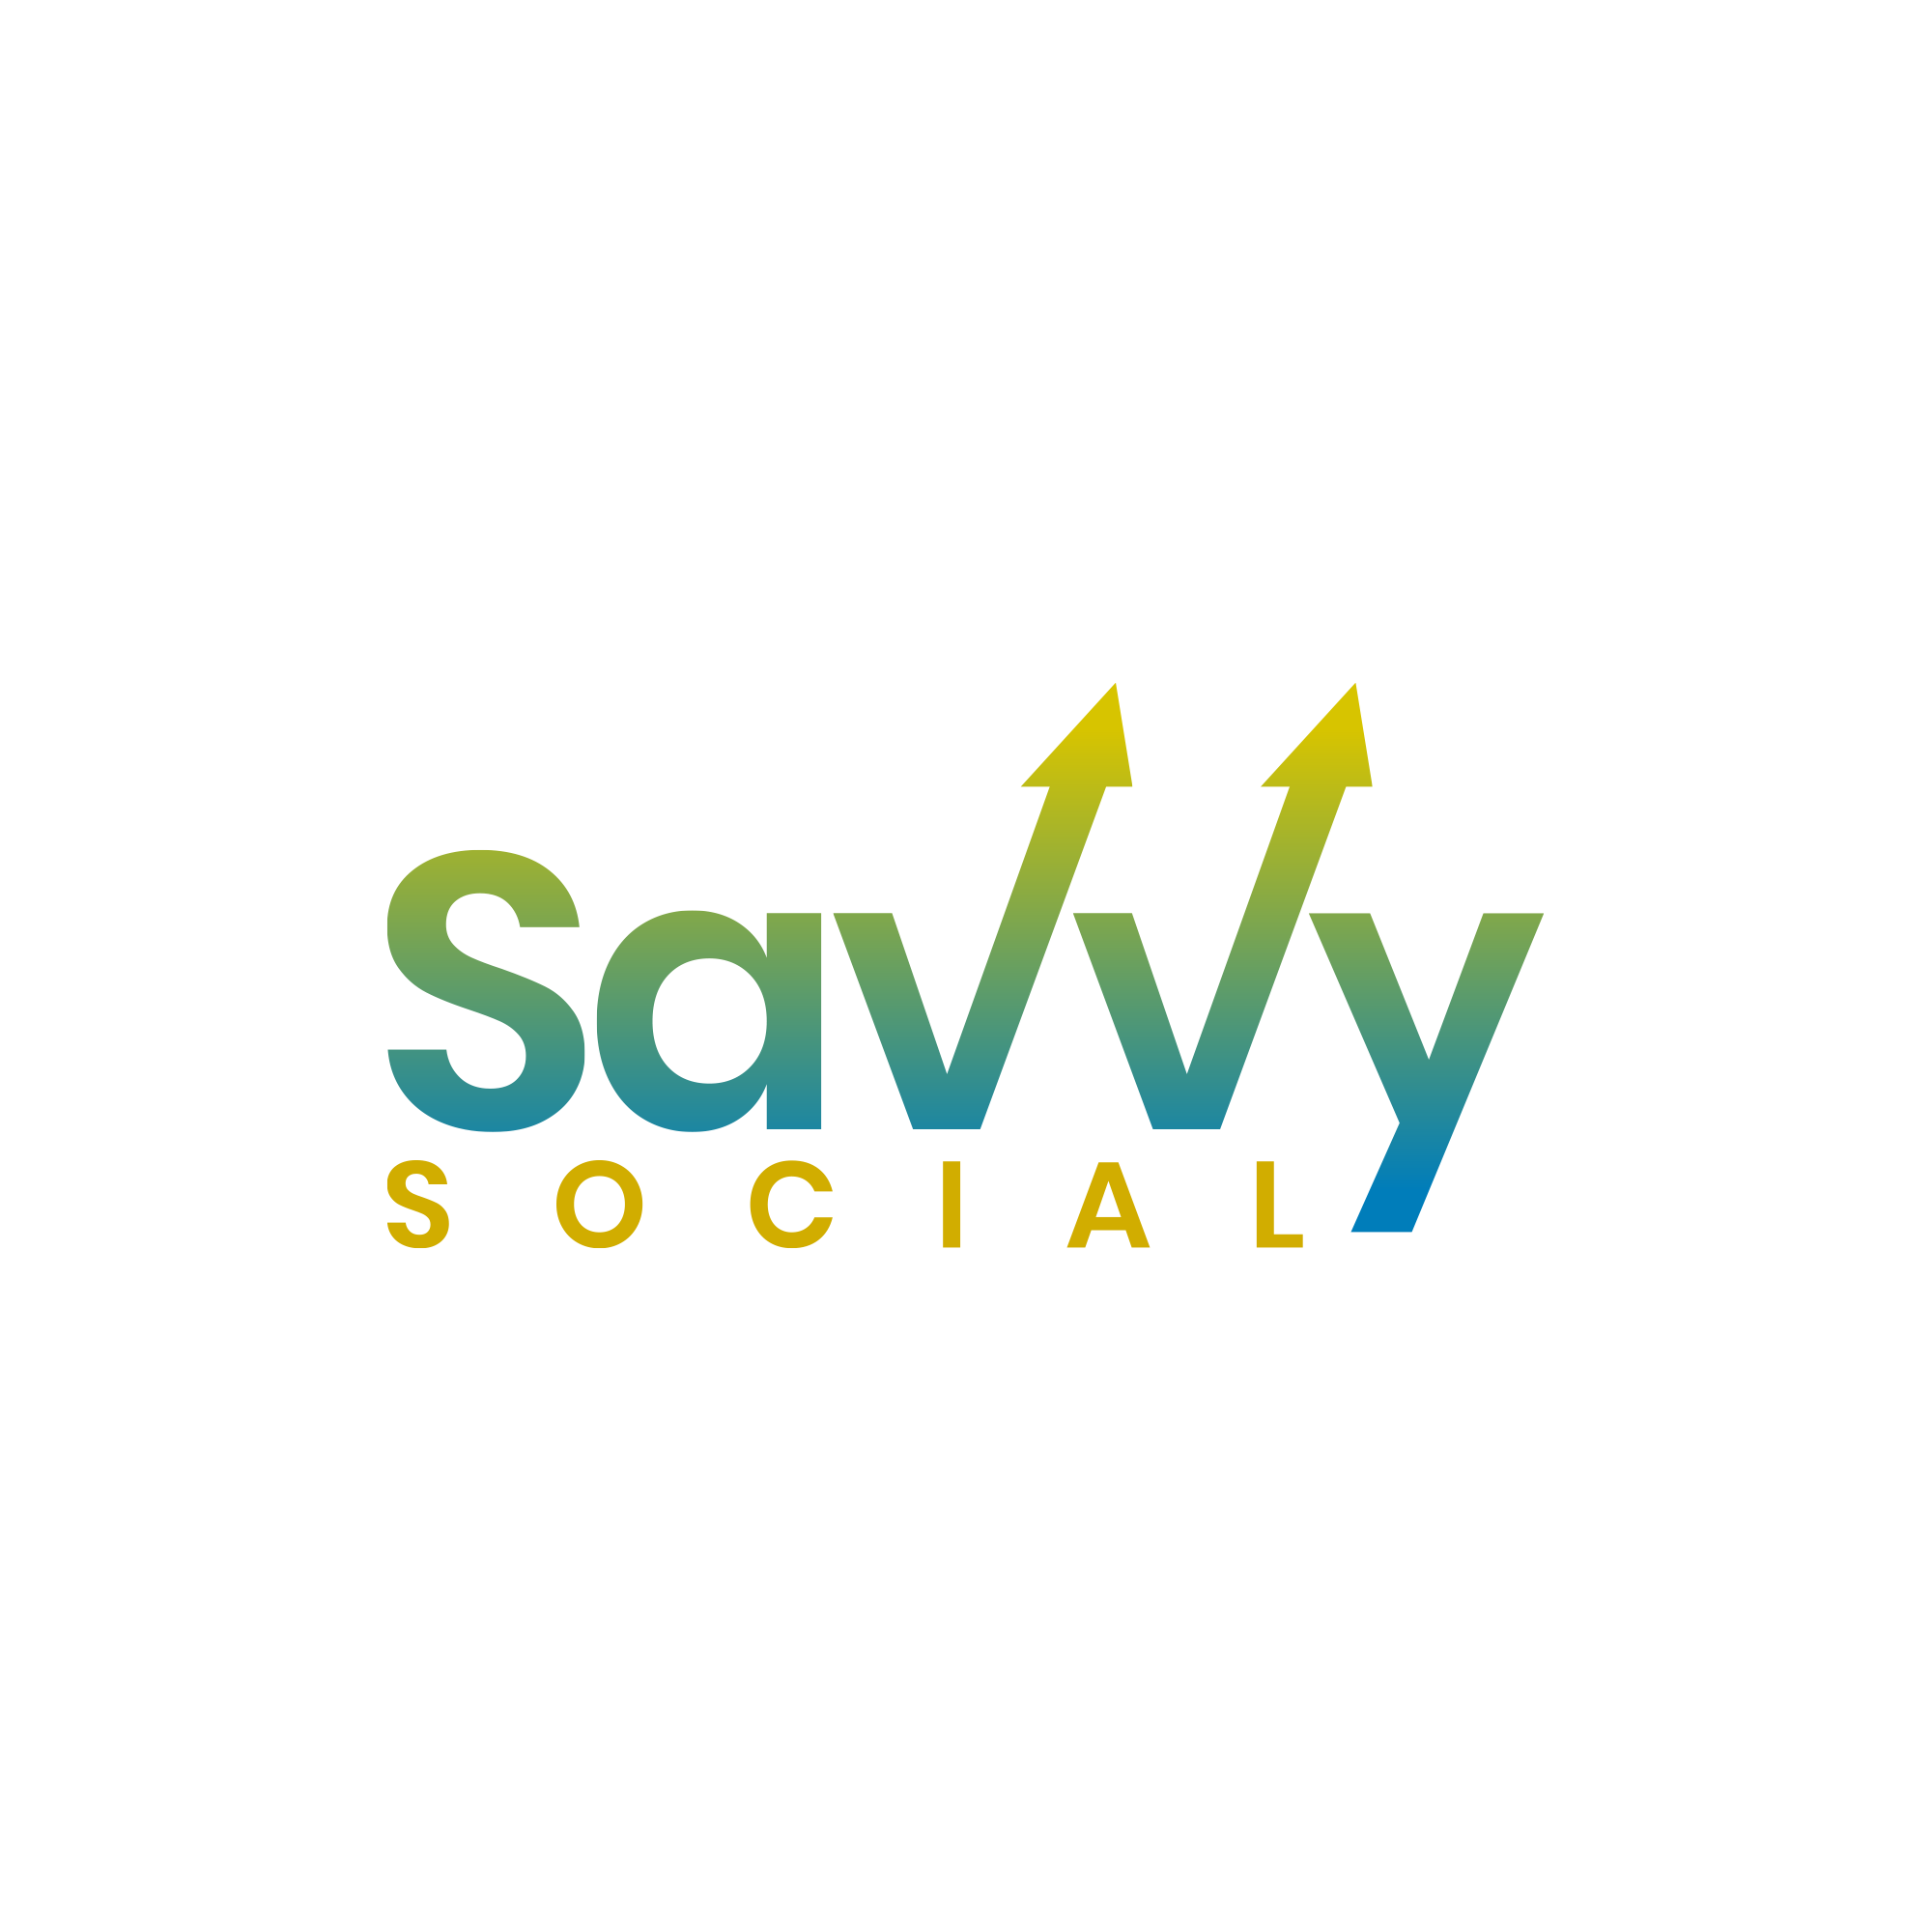 Savvy Social Offers All-in-One Services for Social Media Growth with Money-Back Guarantee 